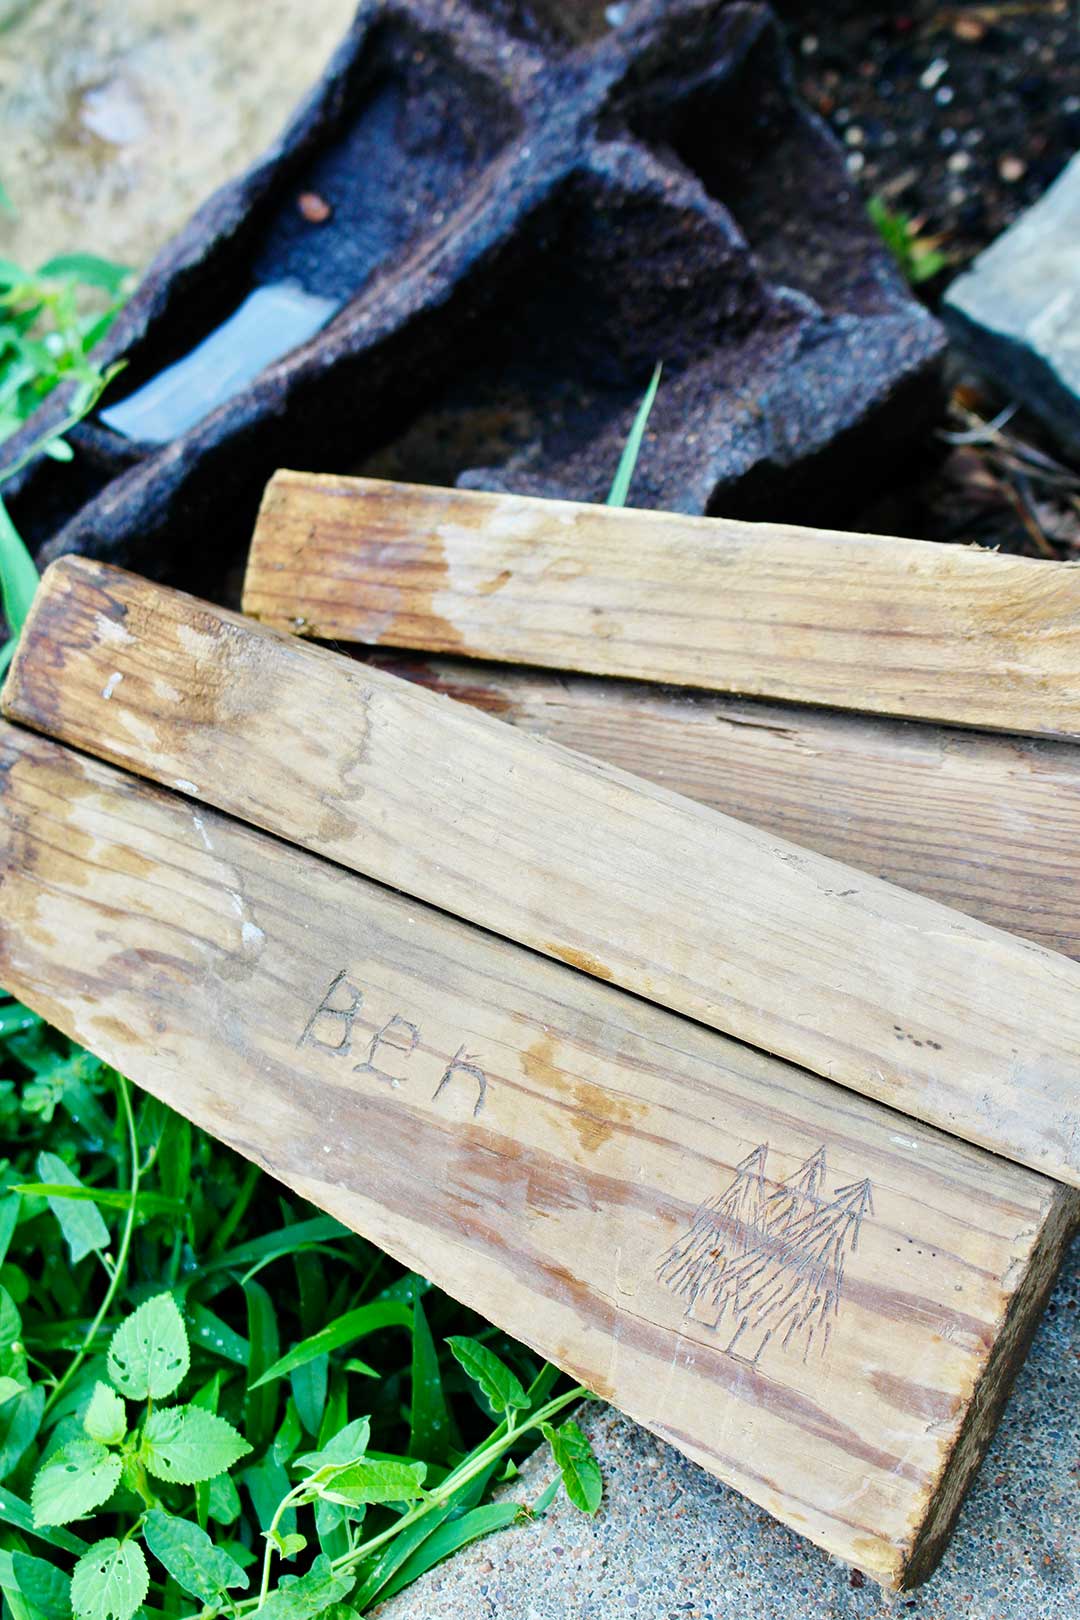 Spare wood pieces, one with the name "Ben" and evergreen trees burned into it.